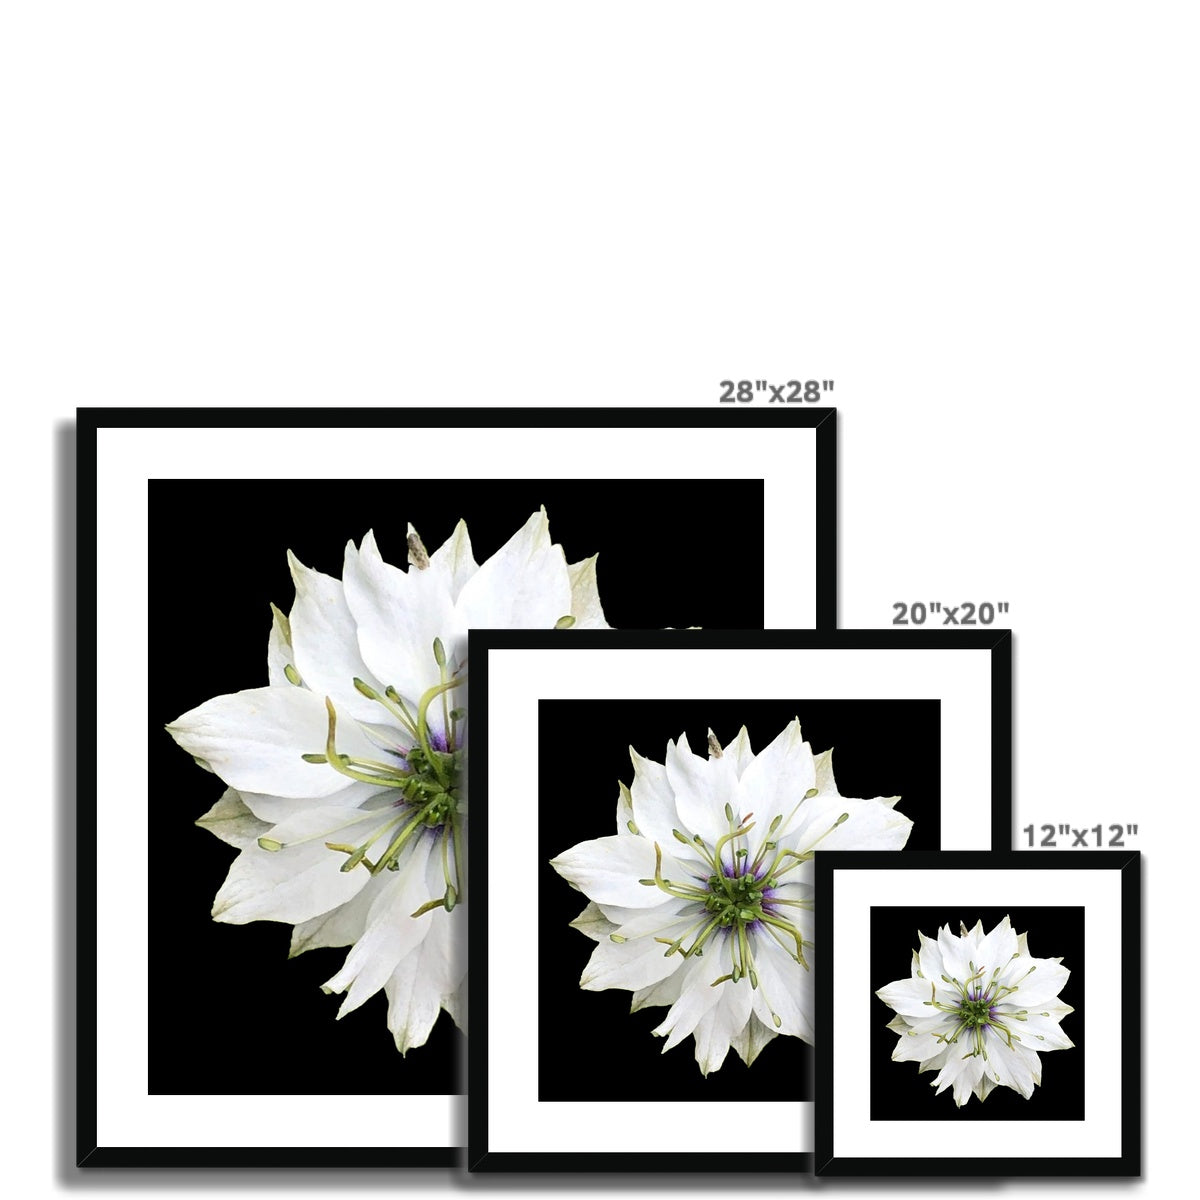 White Flower Print 'Nigella Love in the Mist' Framed & Mounted Print - Nature of Flowers